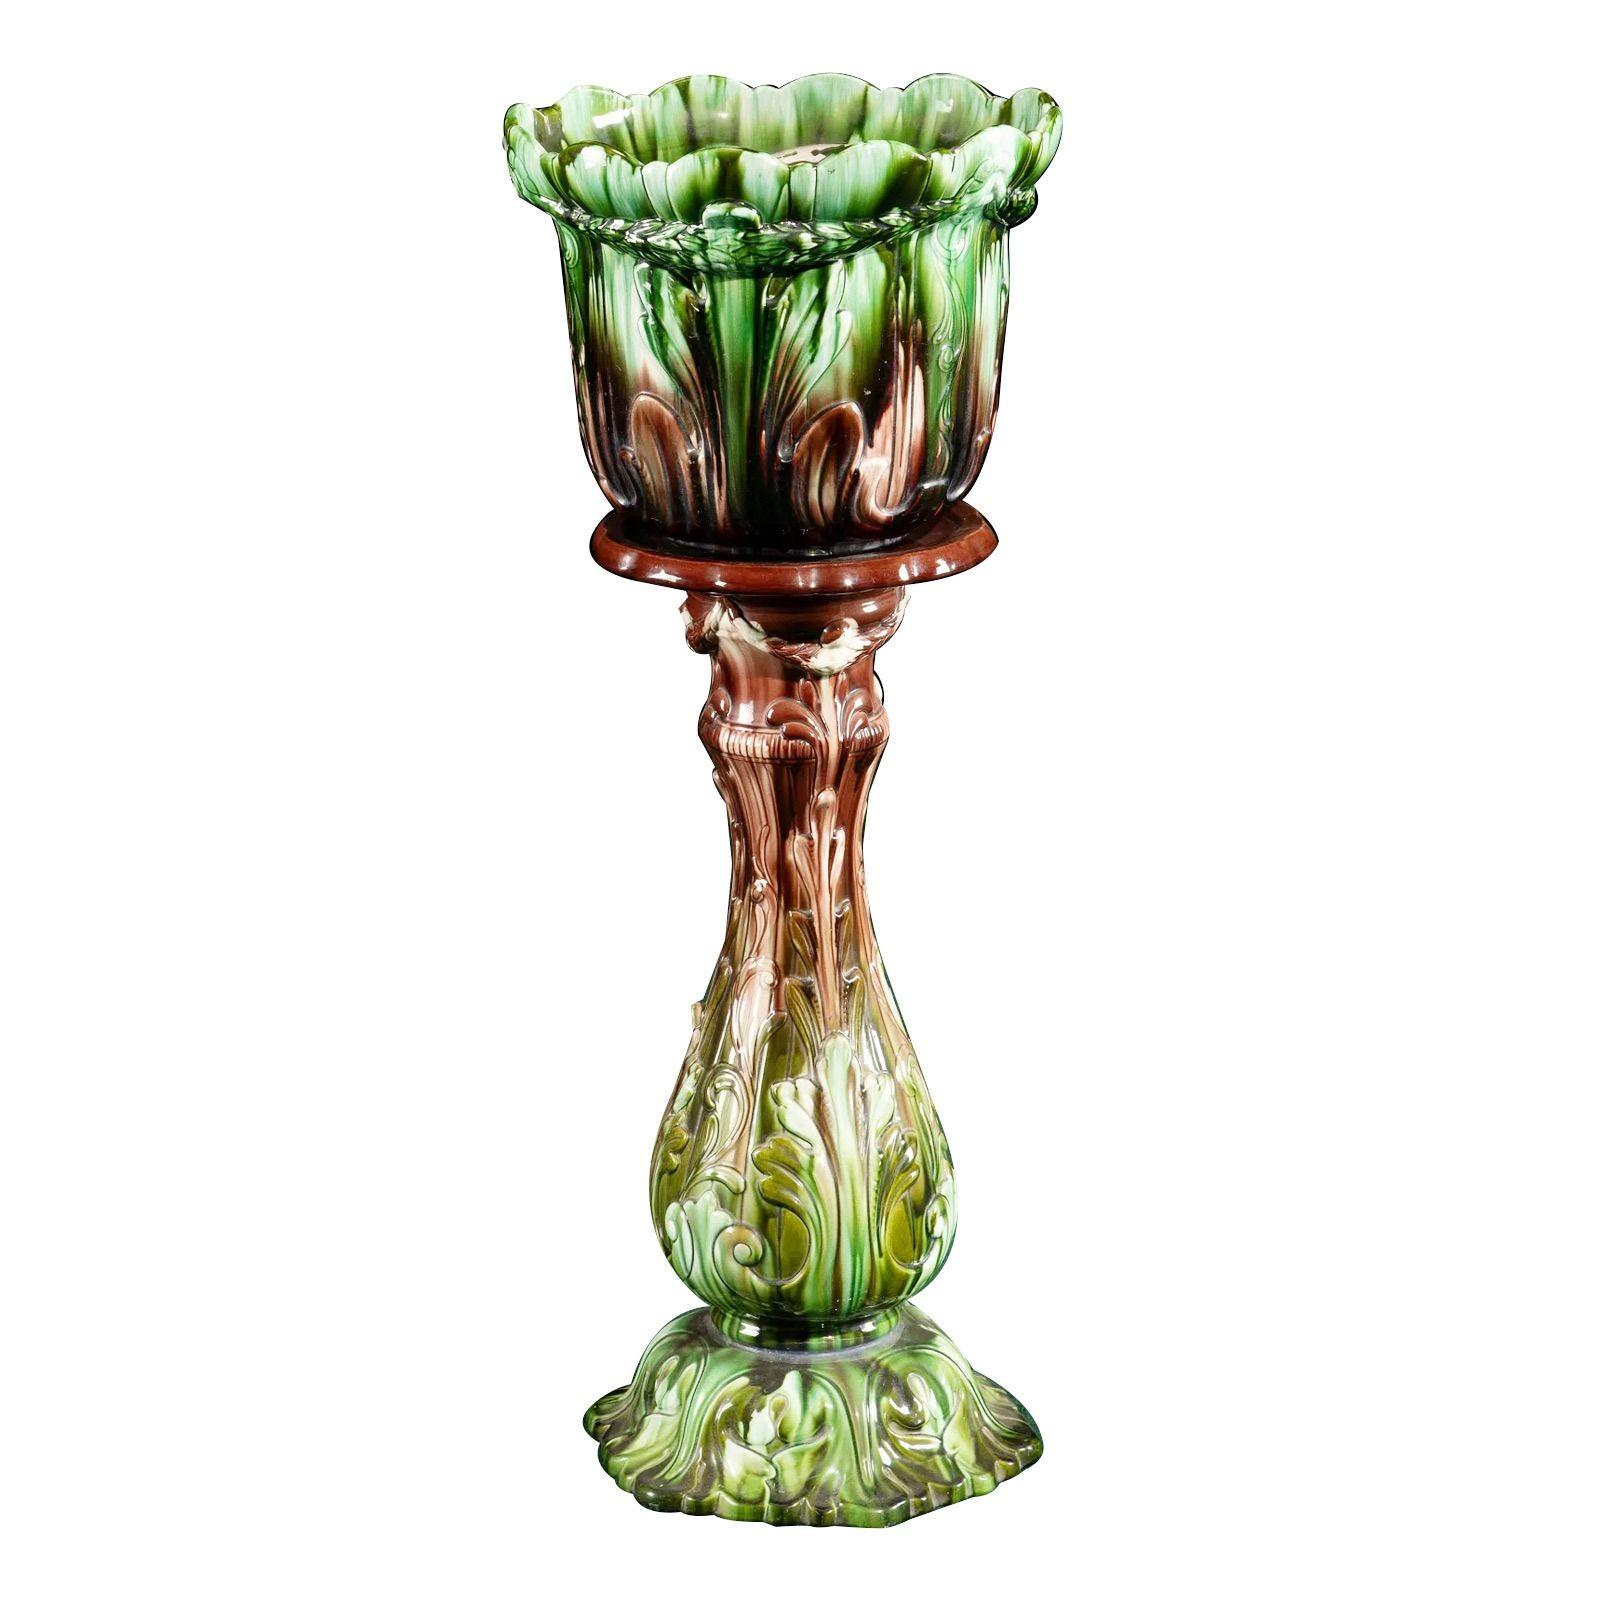 French majolica jardinière & pedestal set, early 20th century.
 

Signed on underside
The molded pottery pot in an Art Nouveau design rendered in greens and burgundy tones
 
Dimensions

46